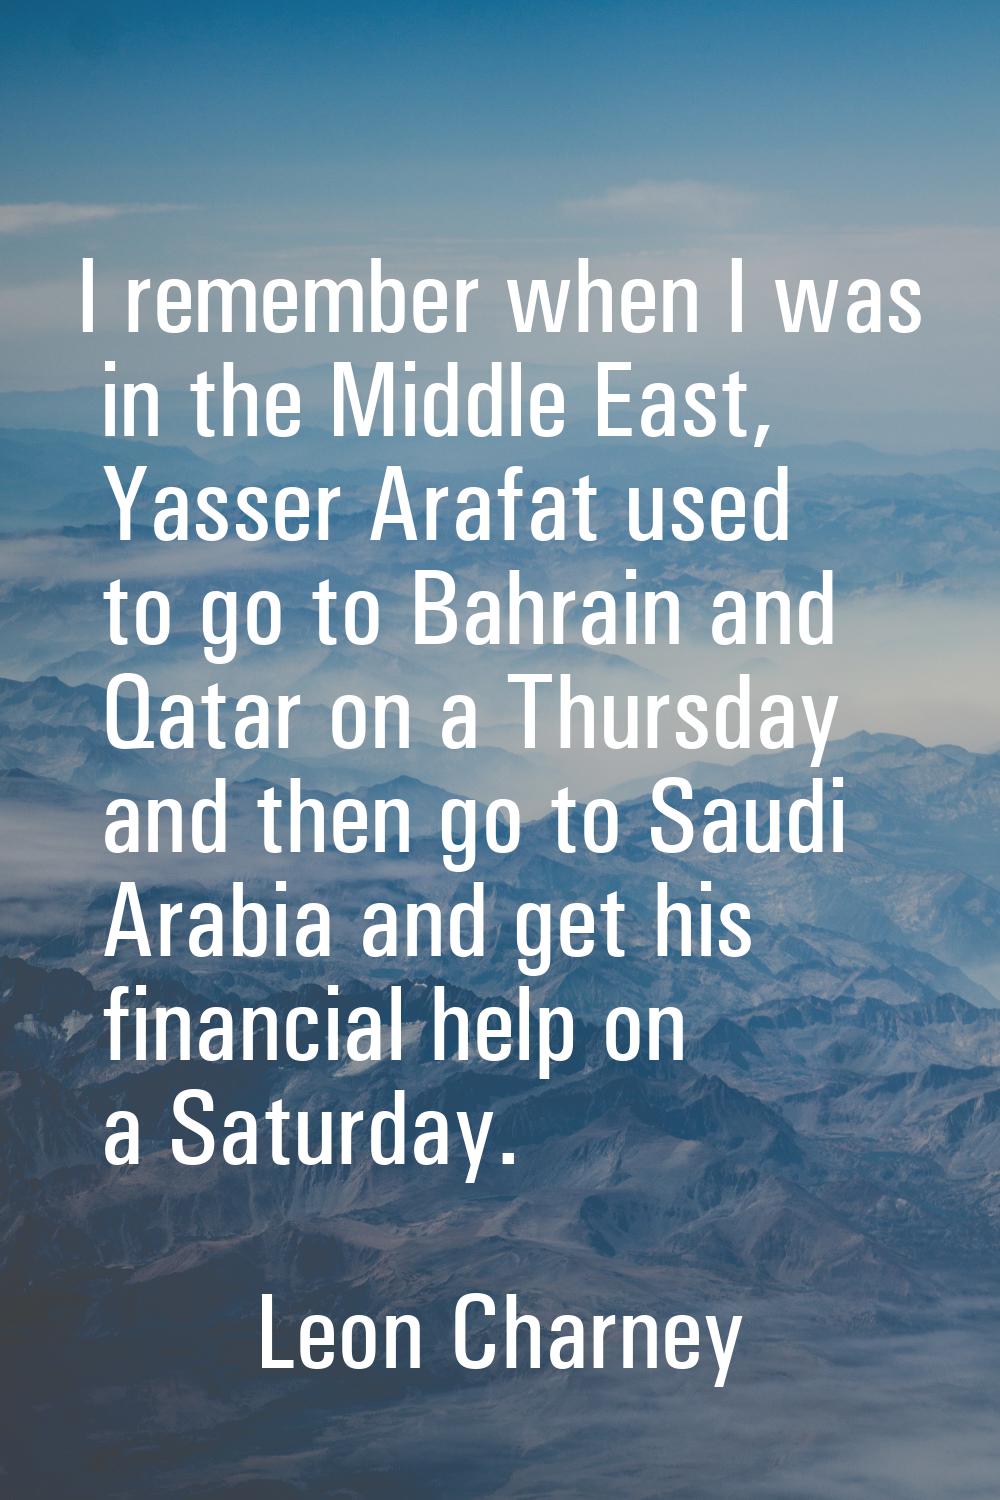 I remember when I was in the Middle East, Yasser Arafat used to go to Bahrain and Qatar on a Thursd